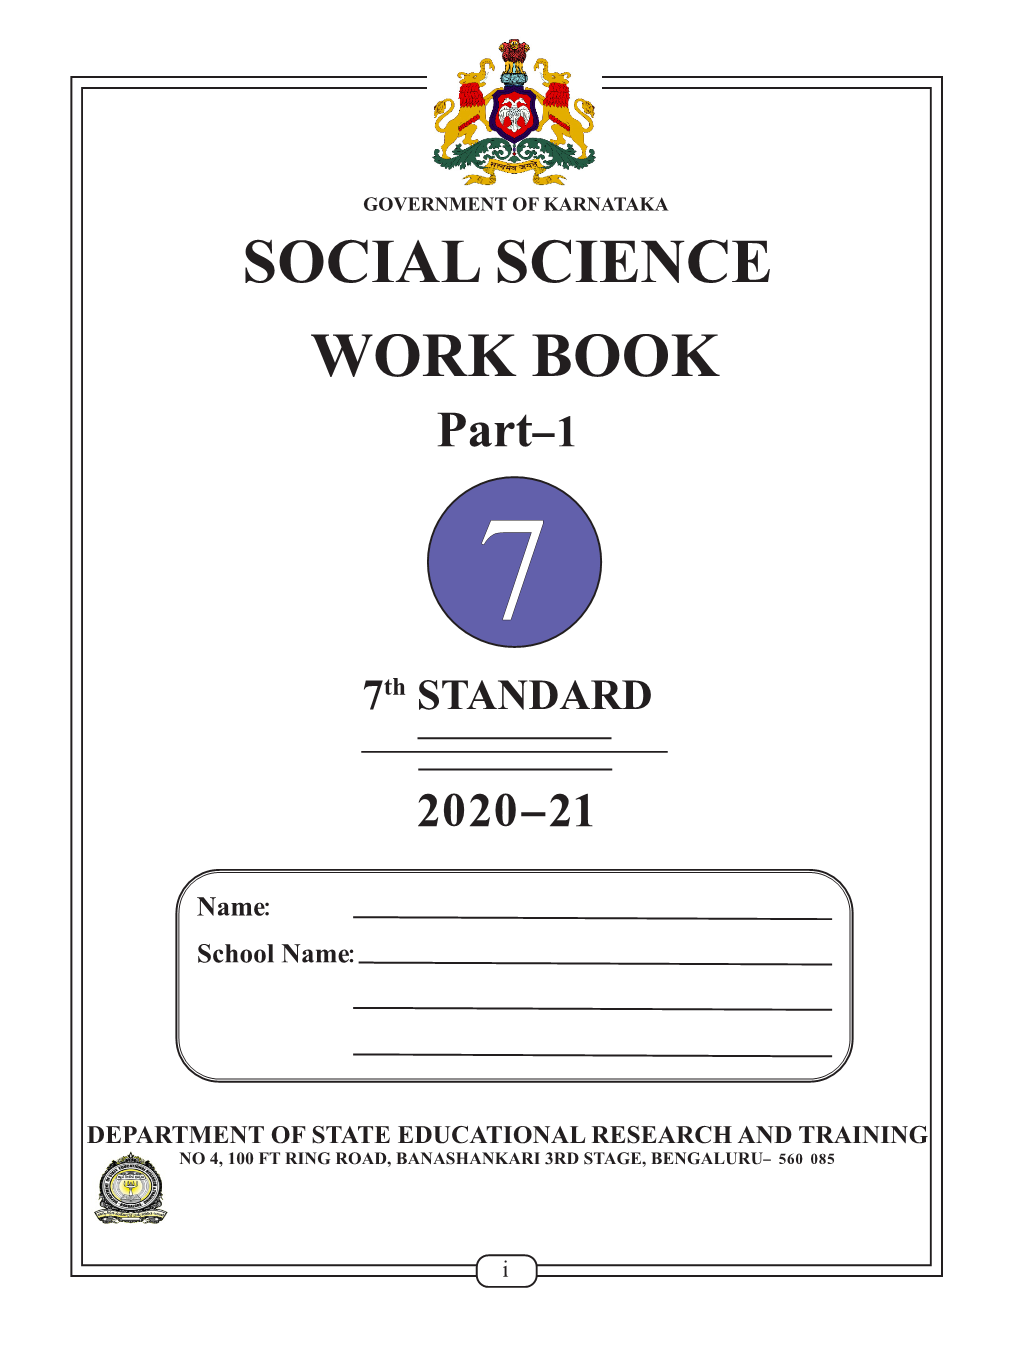 SOCIAL SCIENCE WORK BOOK Part-1 7 7Th STANDARD